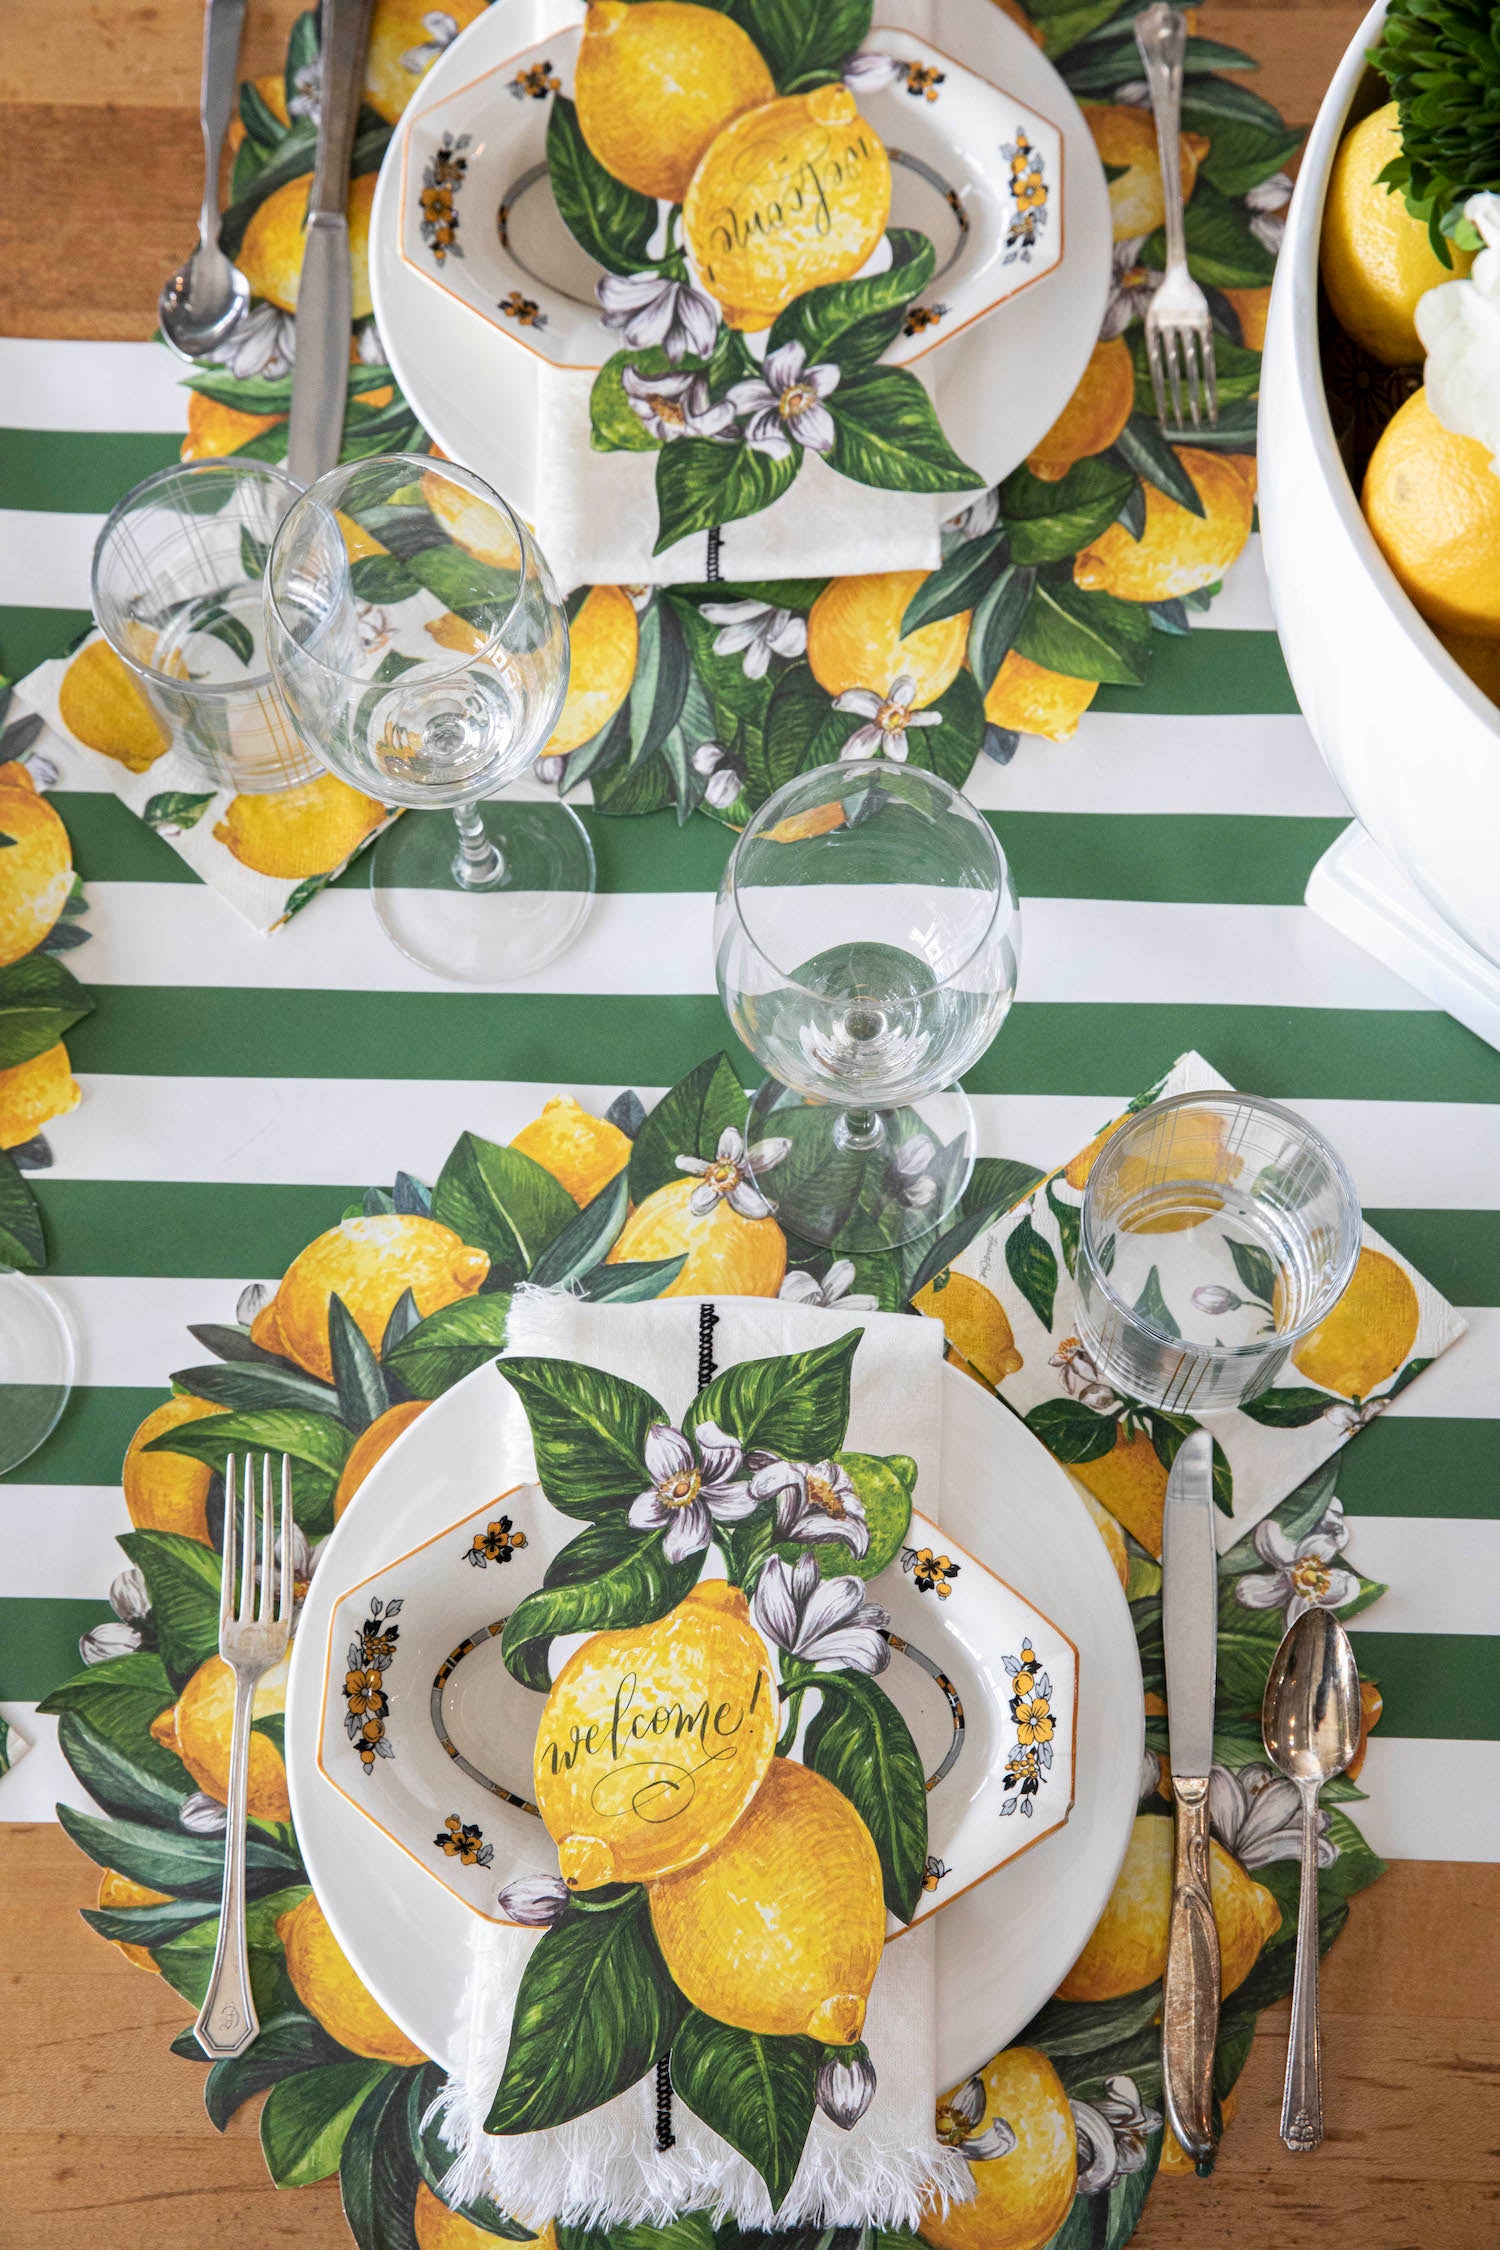 A table setting with Die-cut Lemon Wreath Placemats by Hester &amp; Cook on a green and white striped tablecloth.